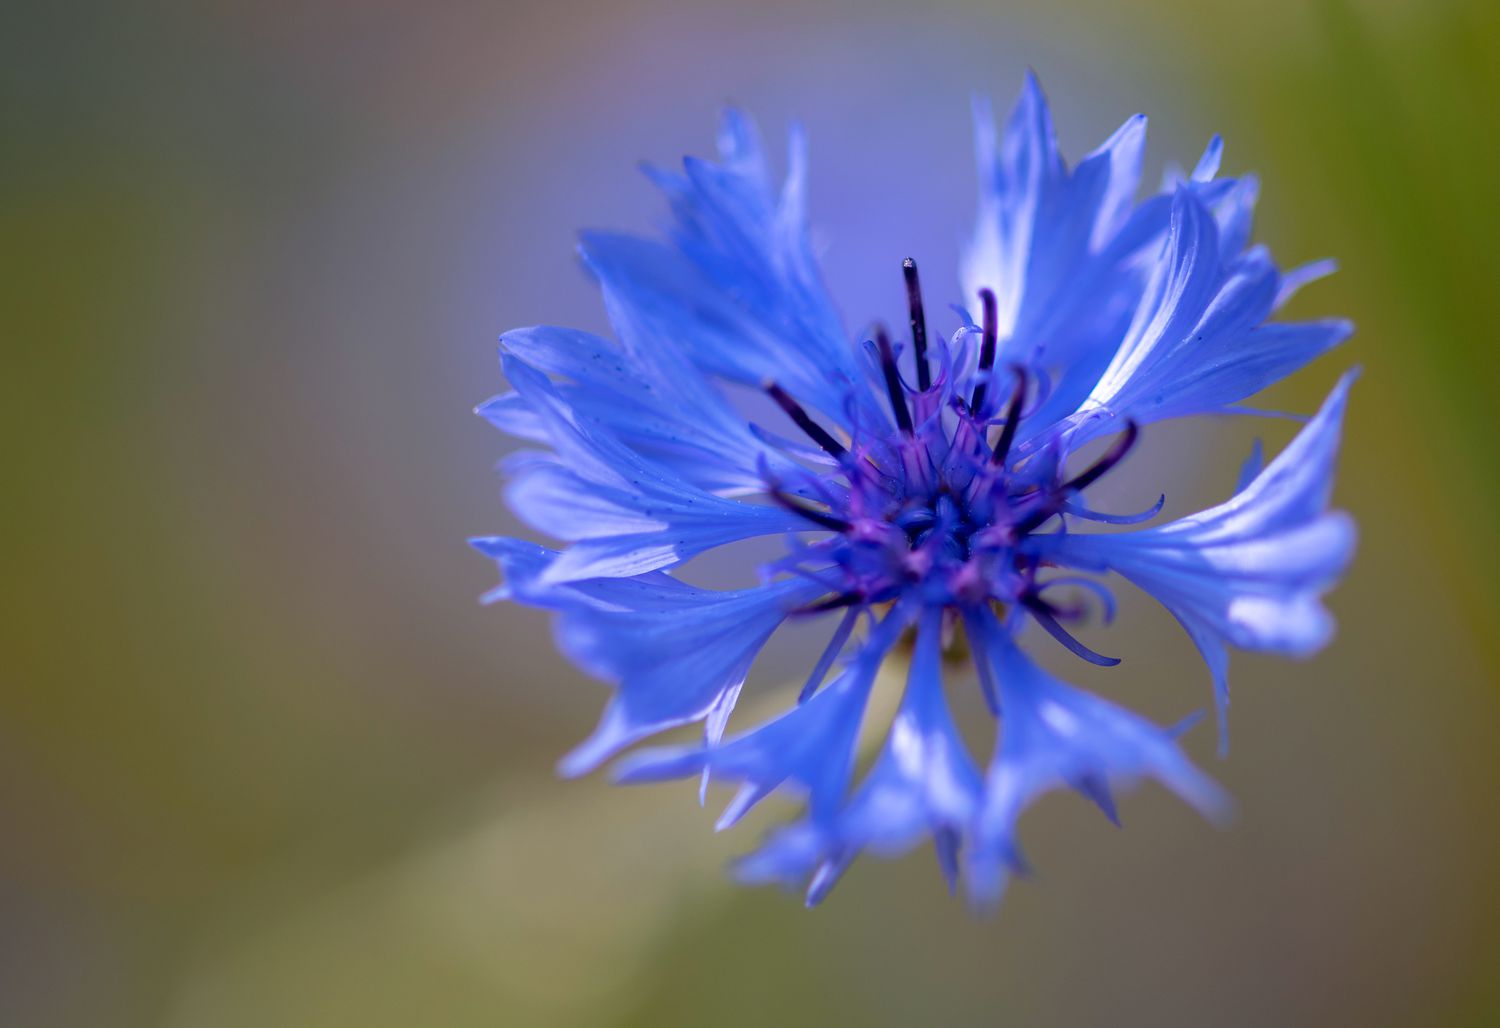 Blue-purple cornflower with ruffled petals clustered together closeup